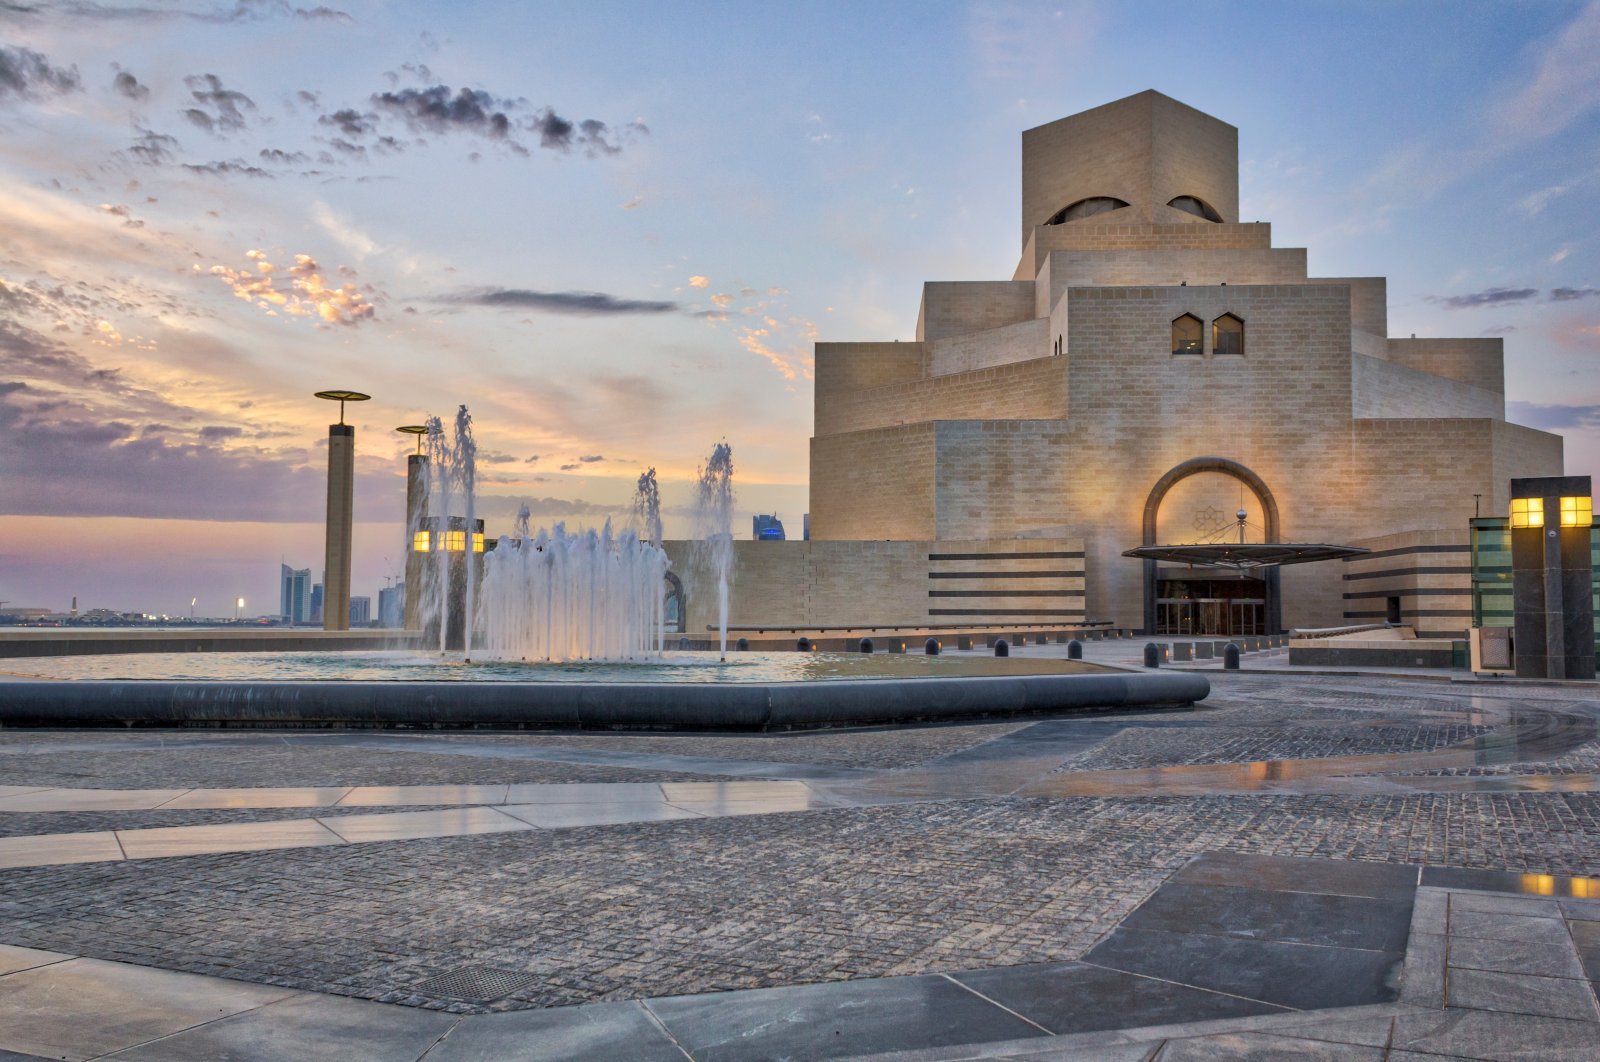 Must-see museums of Qatar blend artistic, architectural beauty